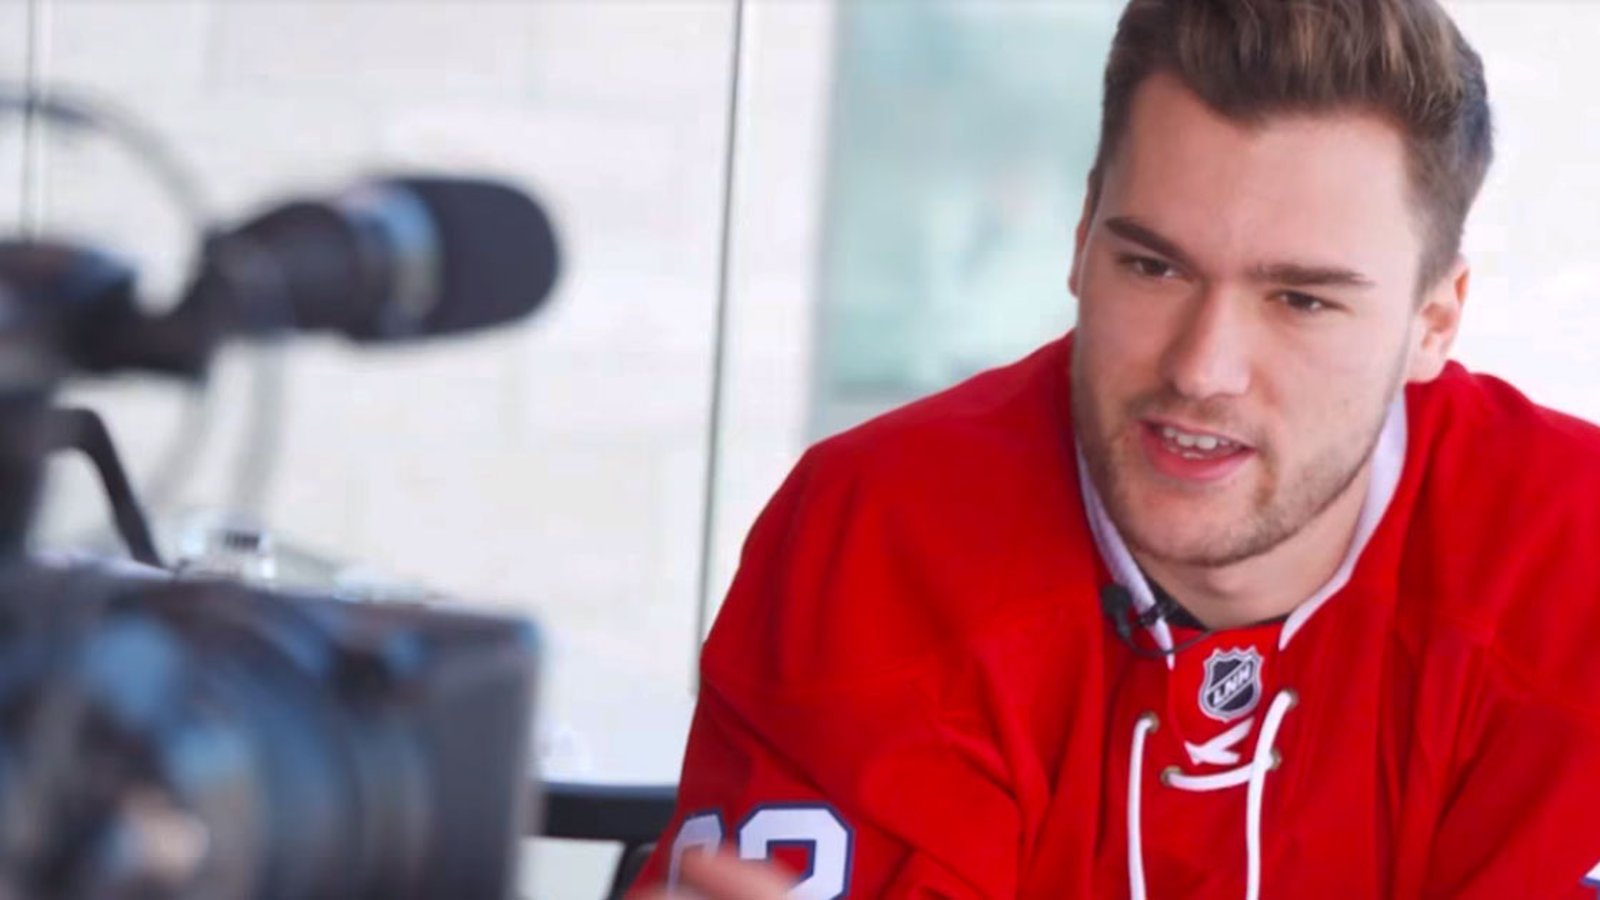 Breaking: Jonathan Drouin makes a huge donation to a hospital!